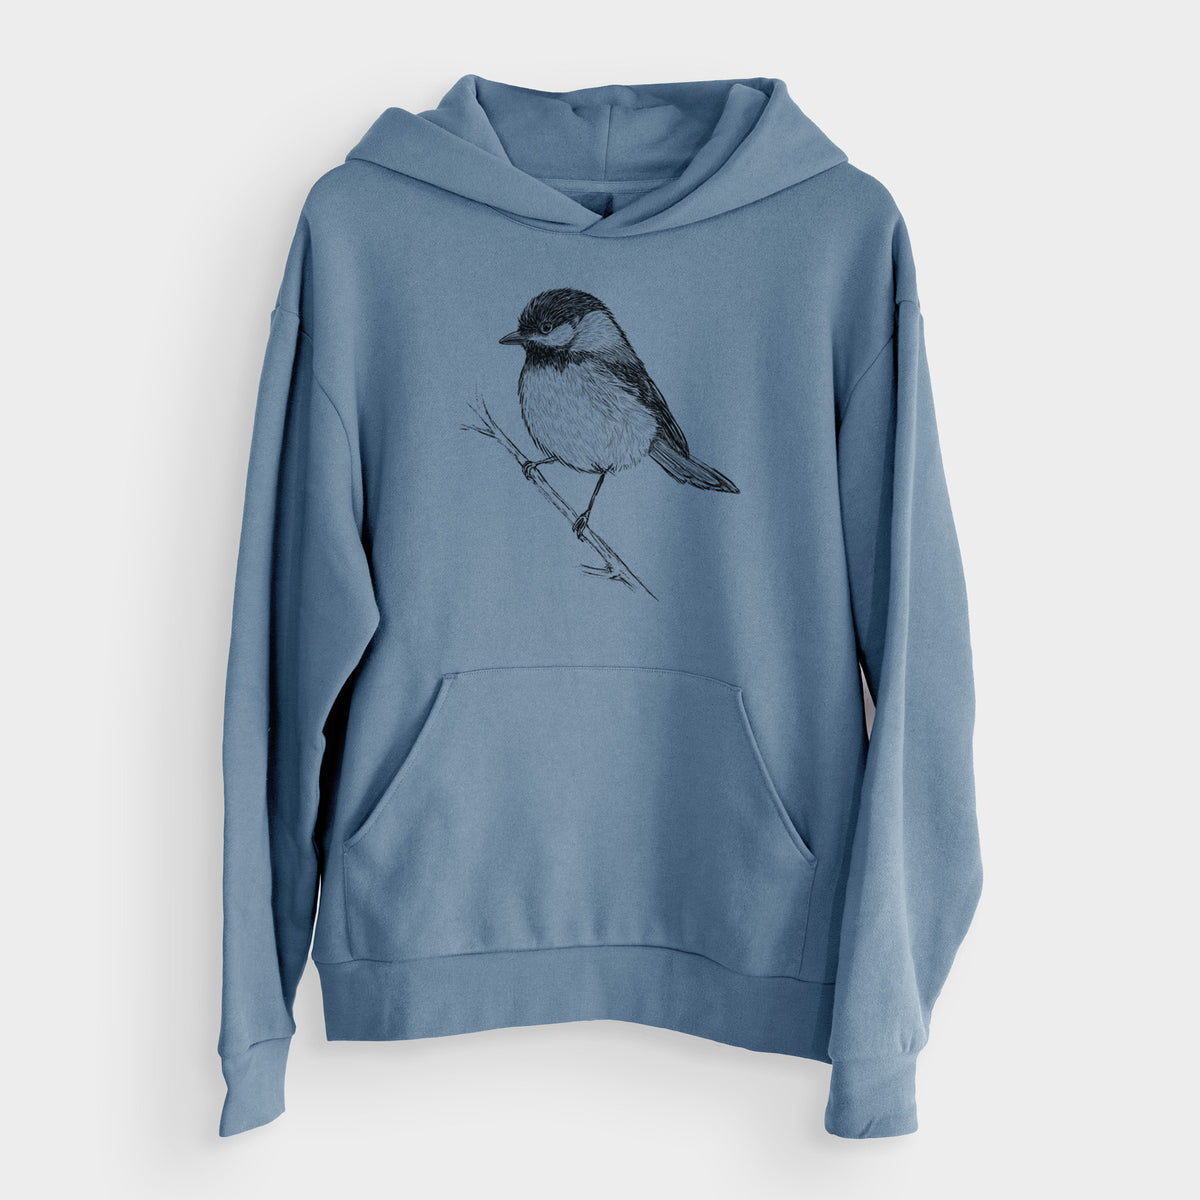 Black-capped Chickadee - Poecile atricapillus  - Bodega Midweight Hoodie